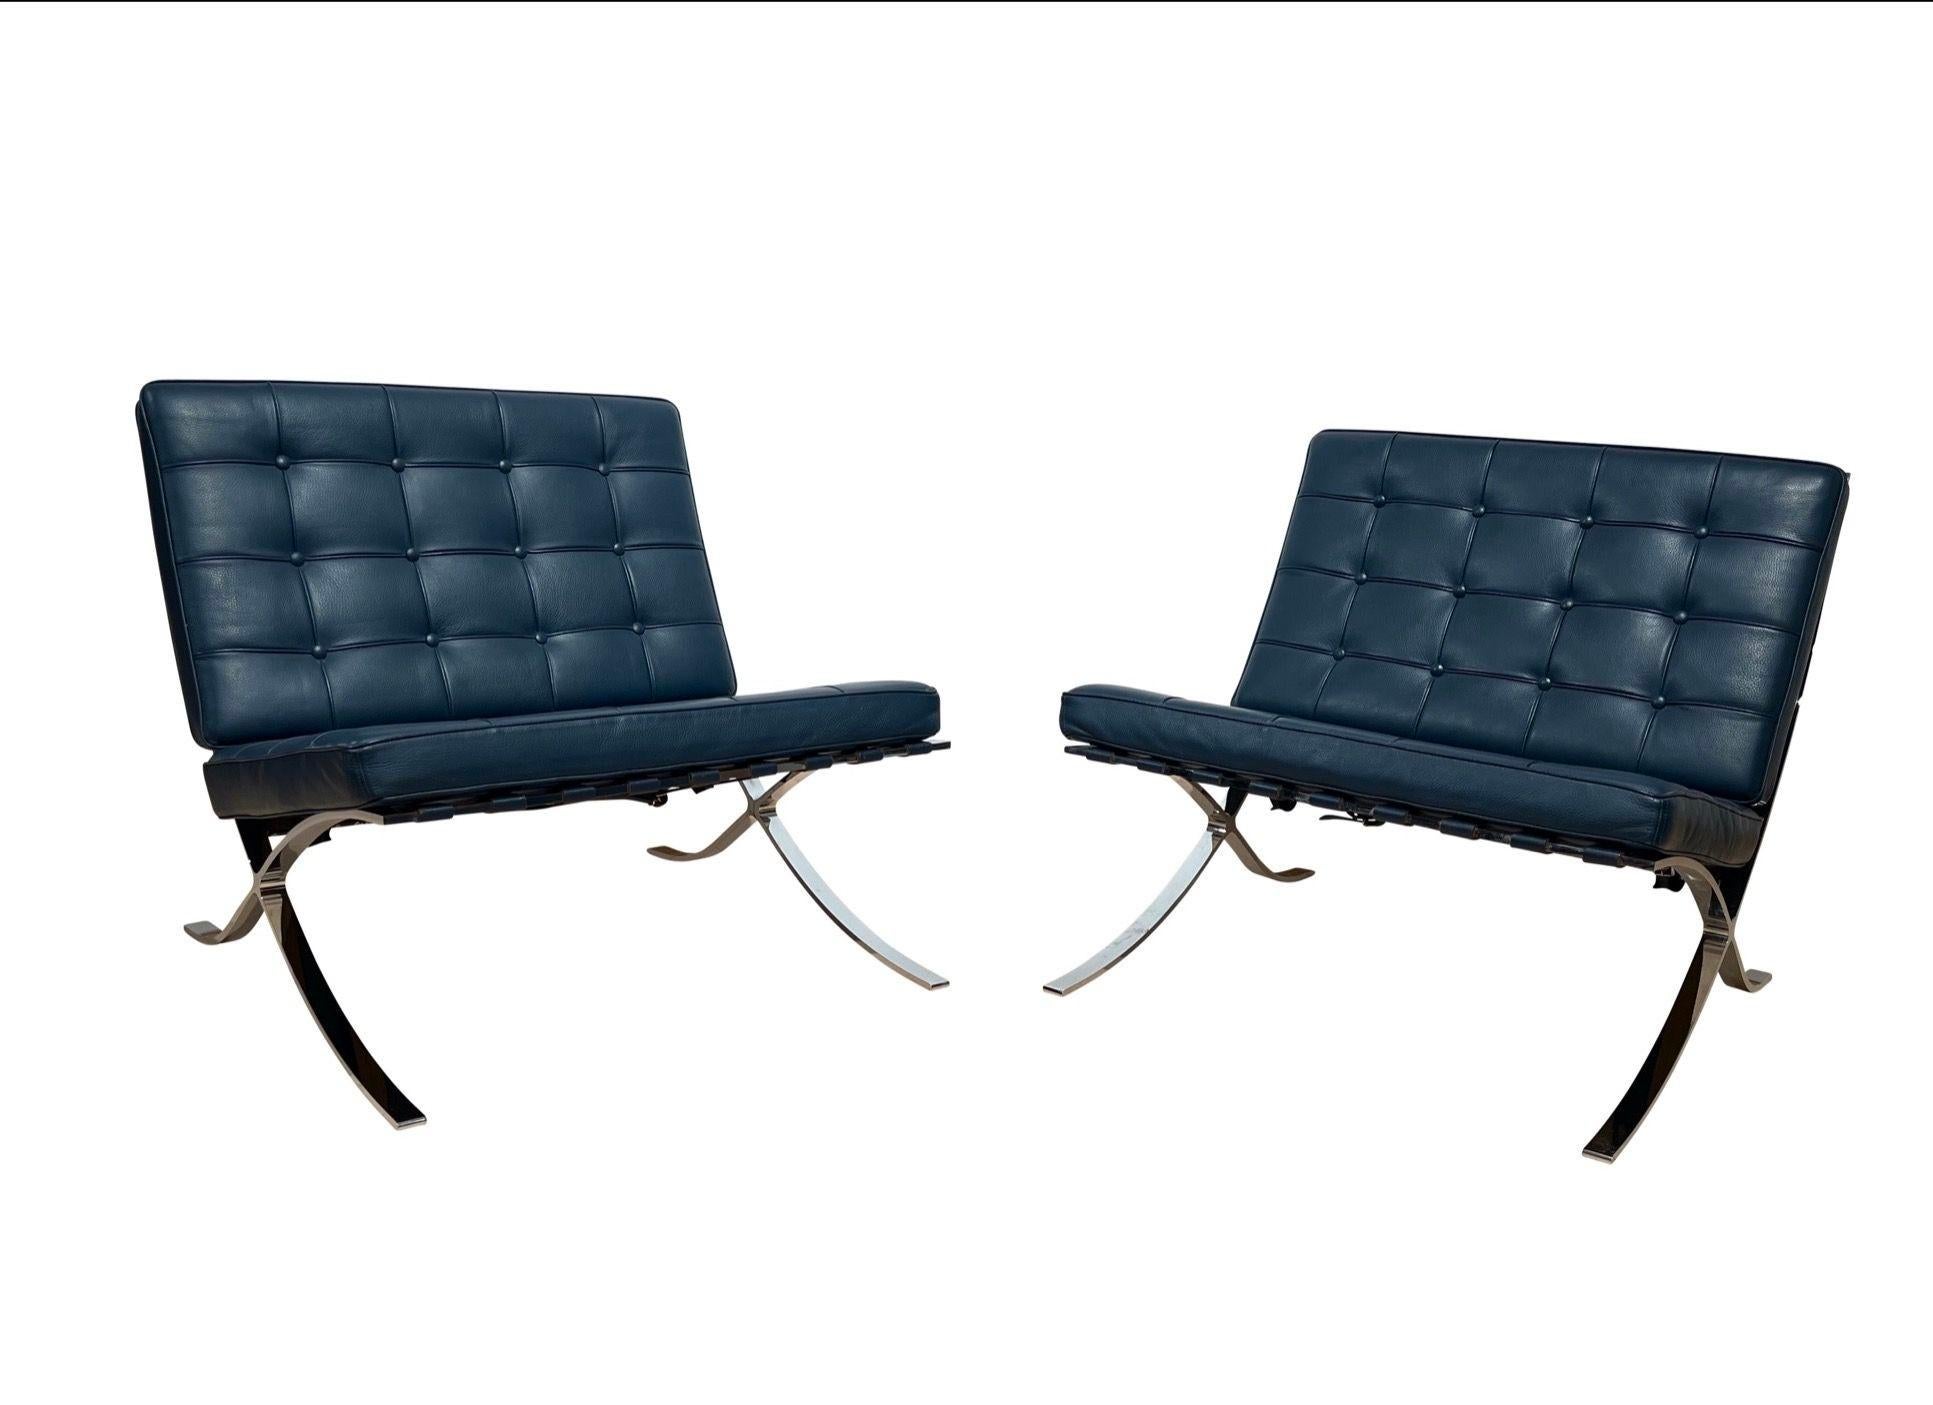 Bauhaus Pair of 1970s Barcelona Lounge Chairs by Mies Van Der Rohe in Blue Leather